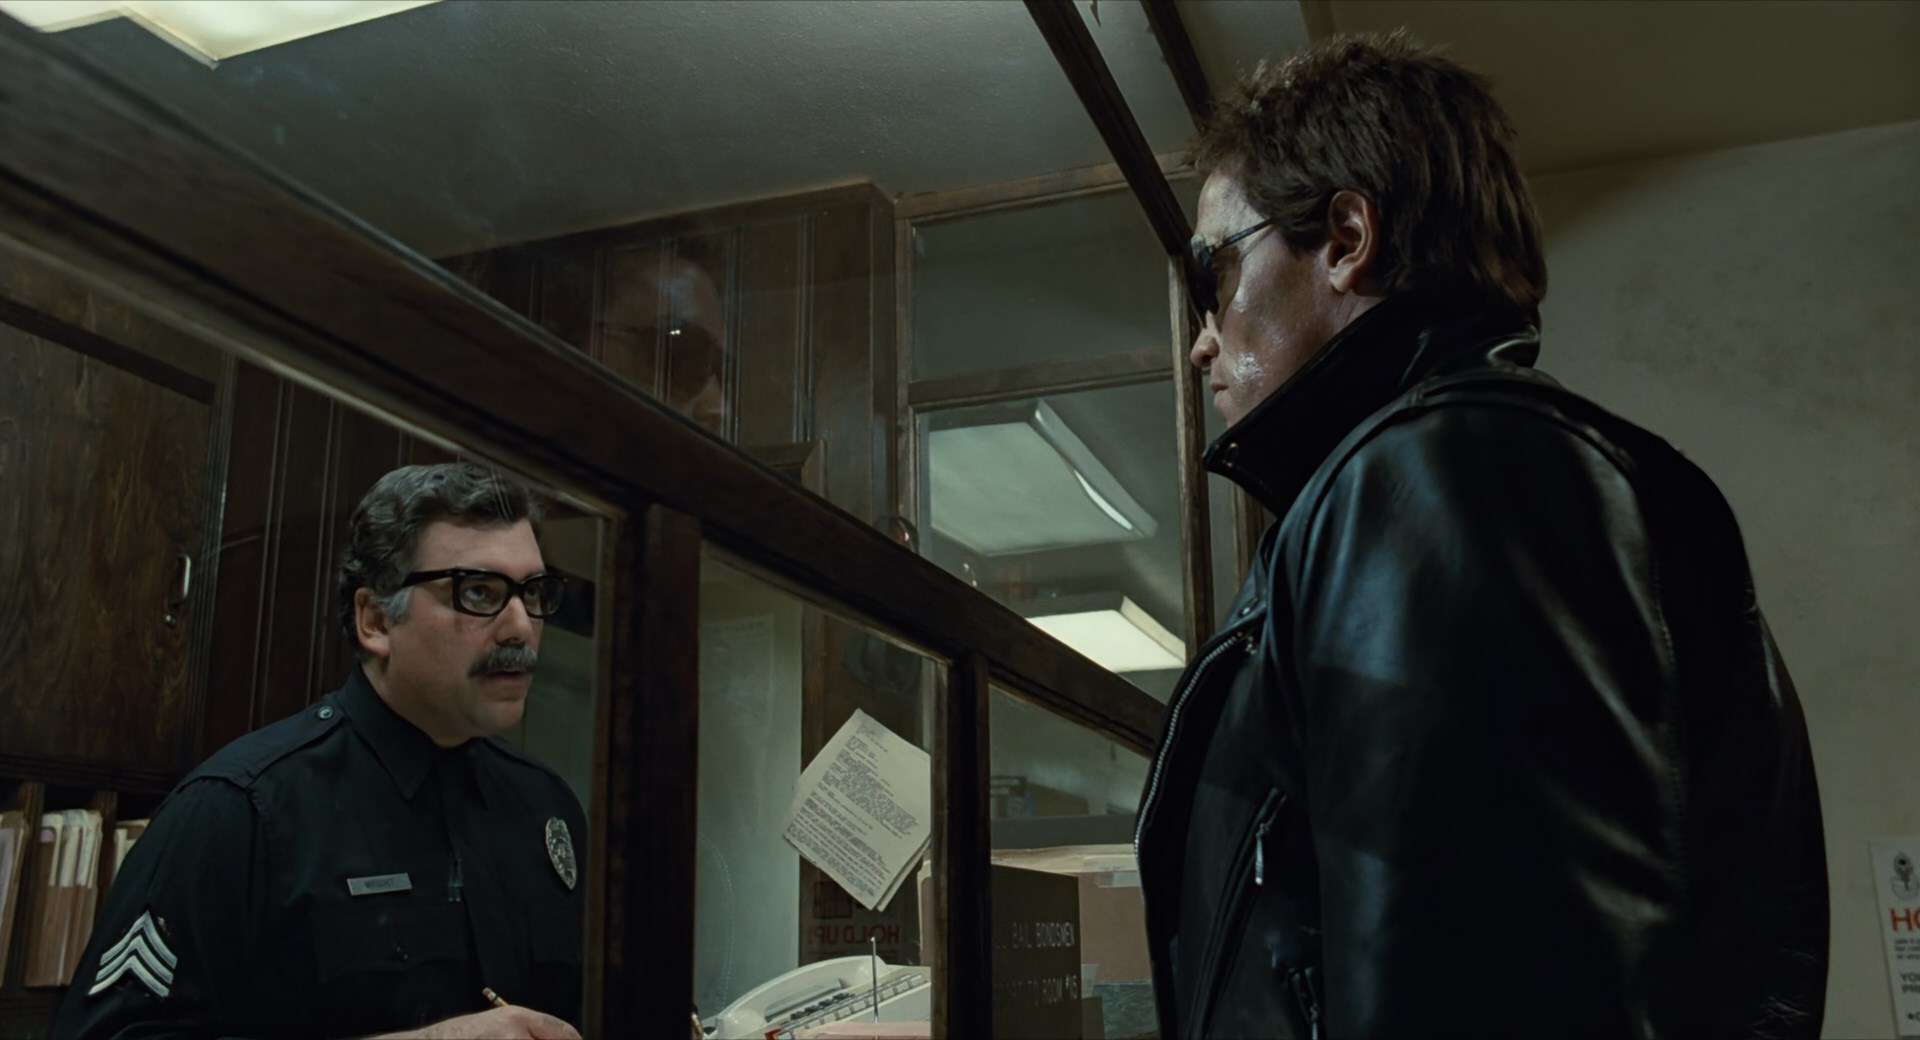 A man in sunglasses speaks with an officer behind a glass wall in this image from Cinema '84.